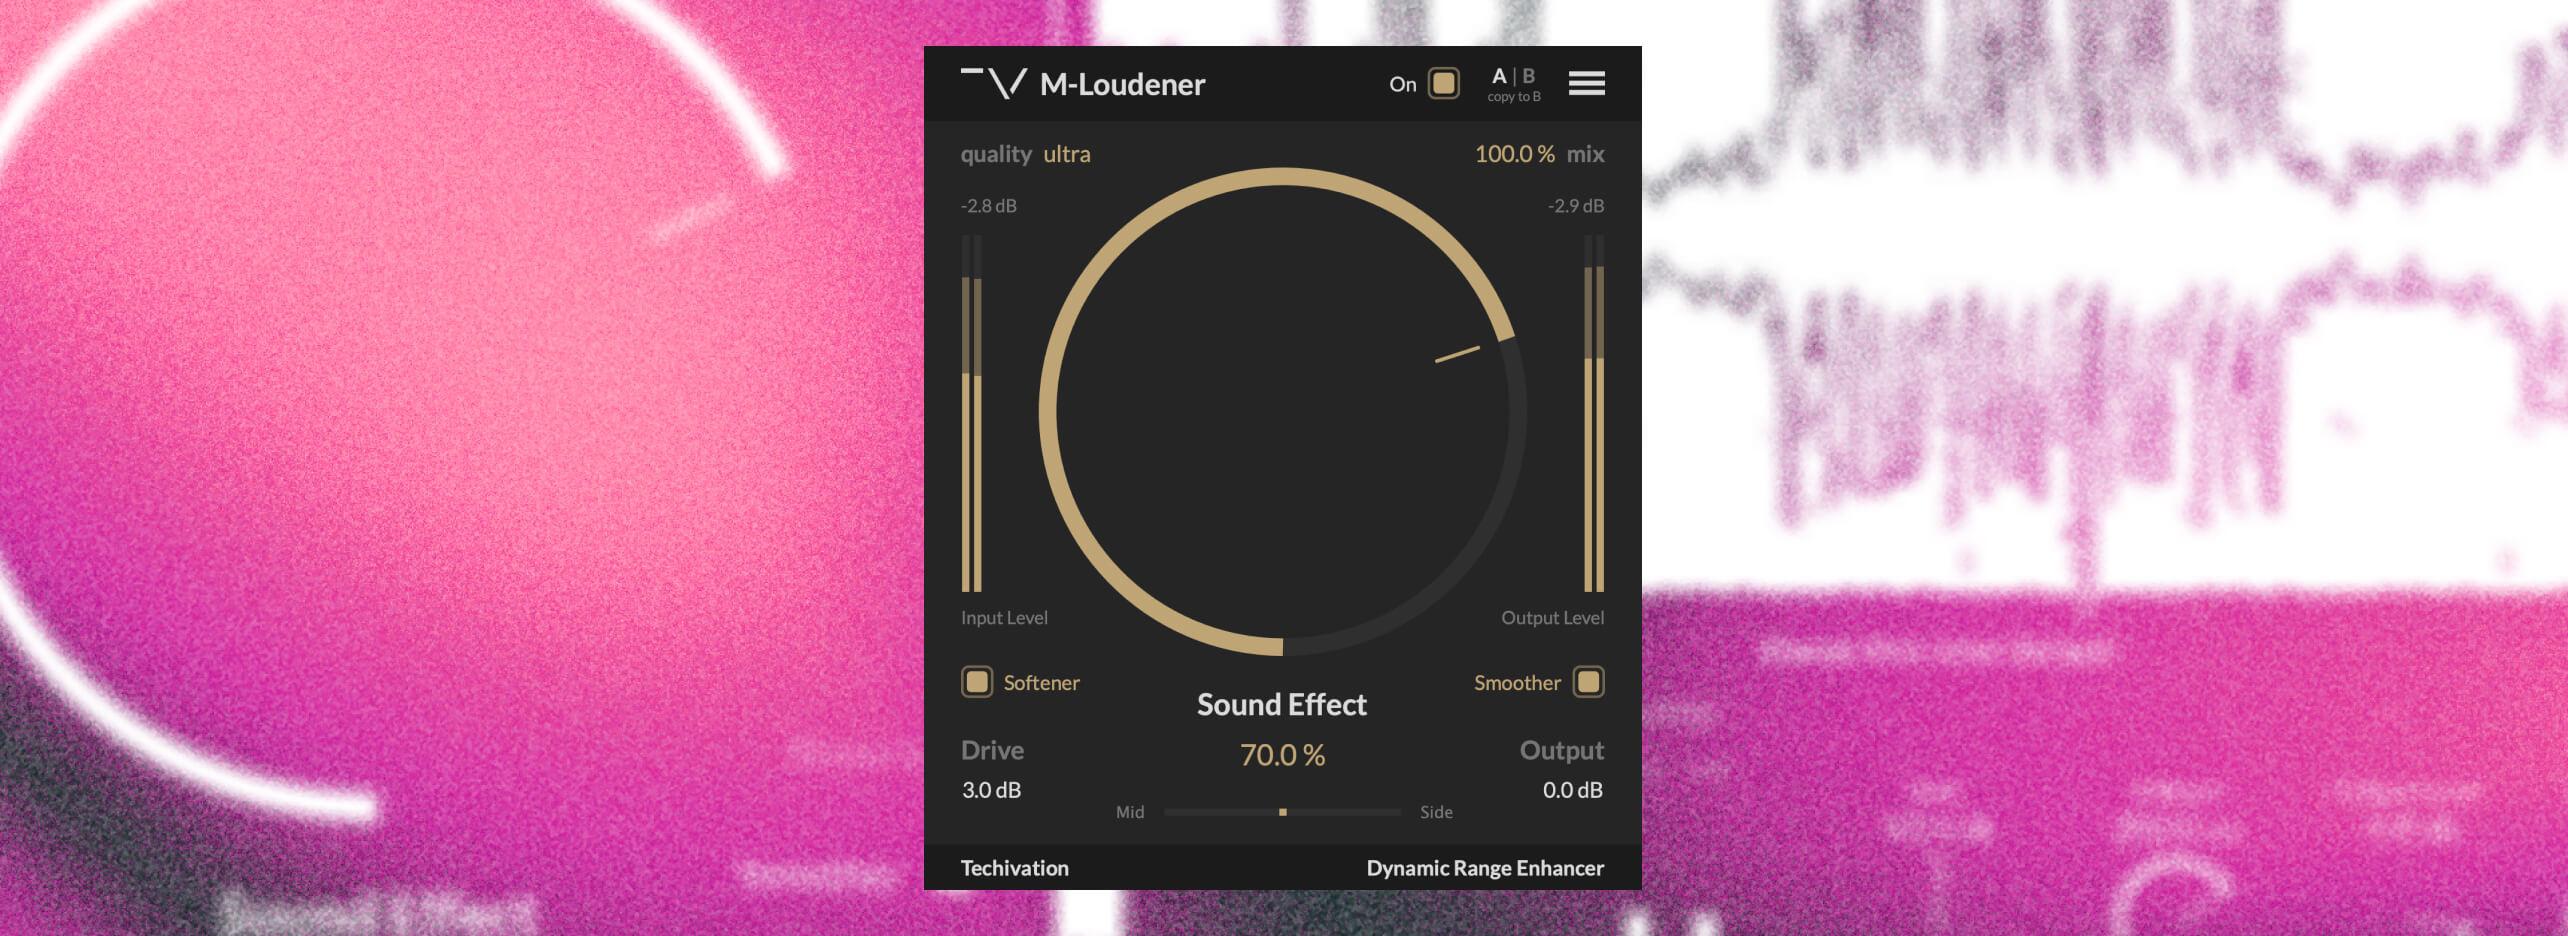 Better Audio Mastering with M-Loudener: 3 Helpful Tips